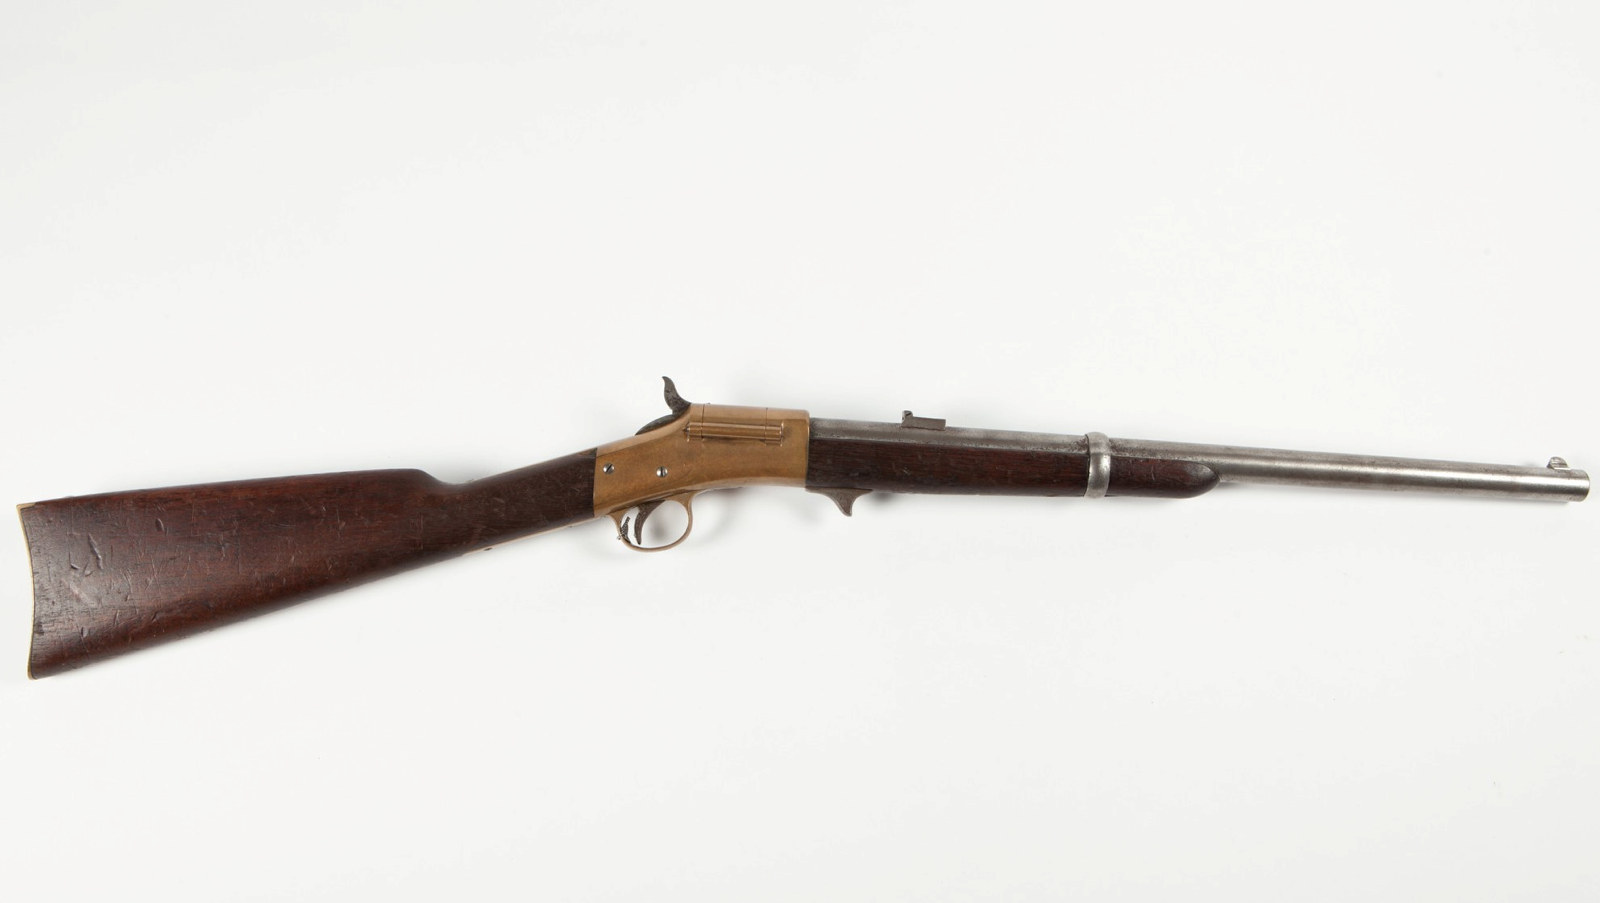 Carbine weapon issued to NSW Police during the gold rush